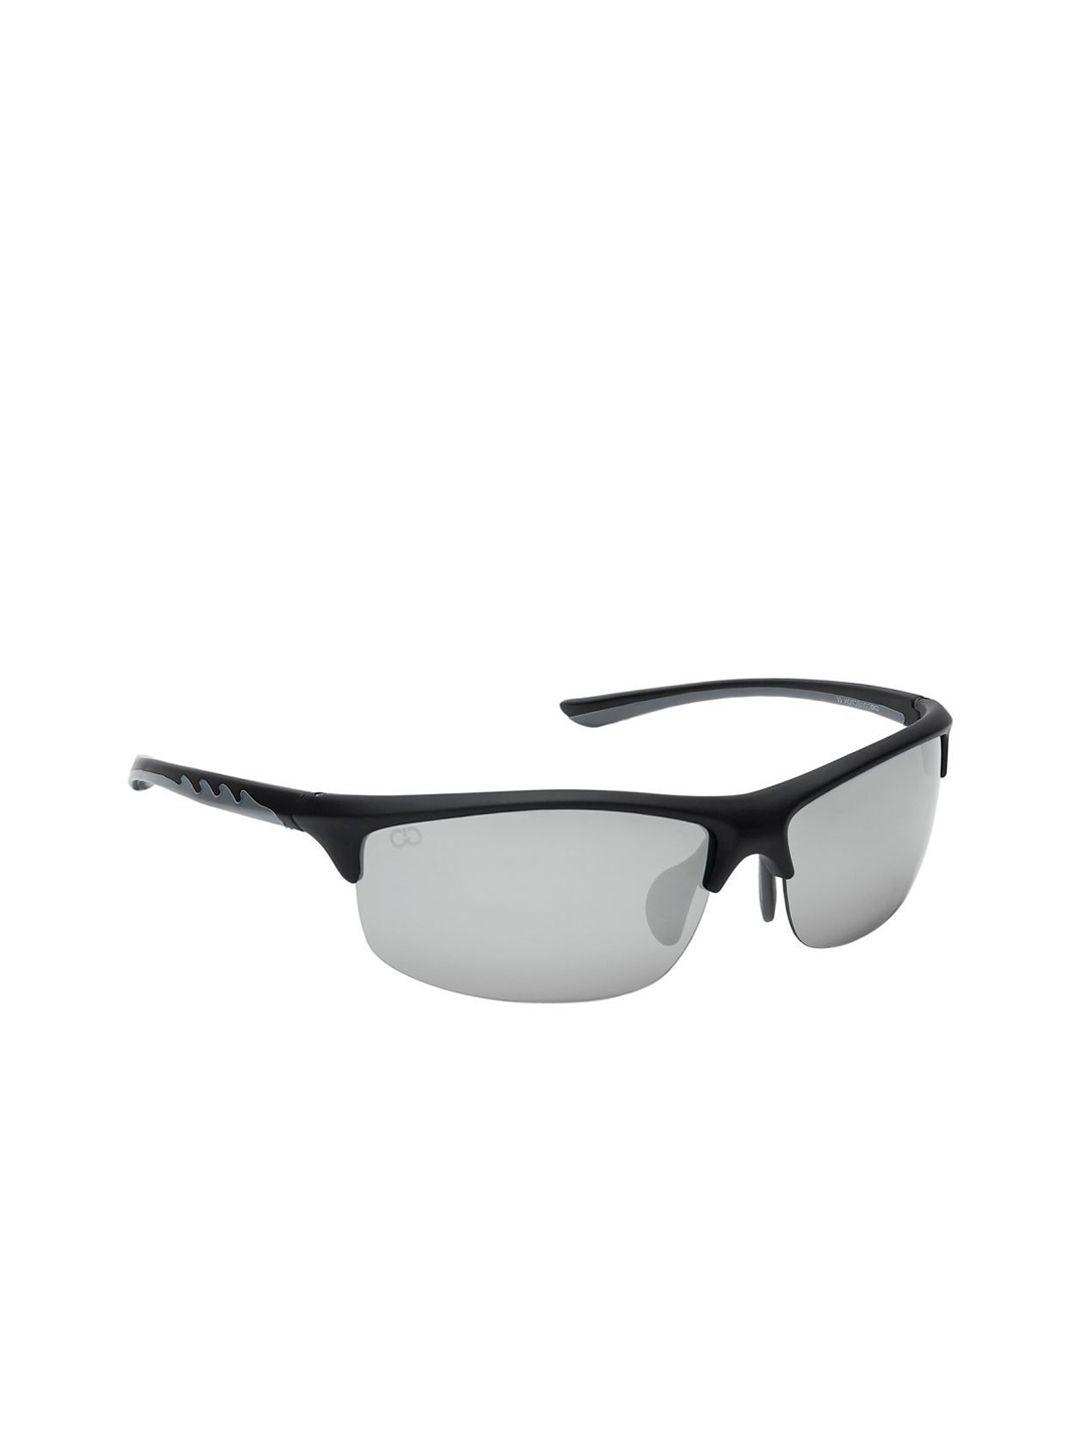 gio collection unisex uv protected sports sunglasses gm10040c04